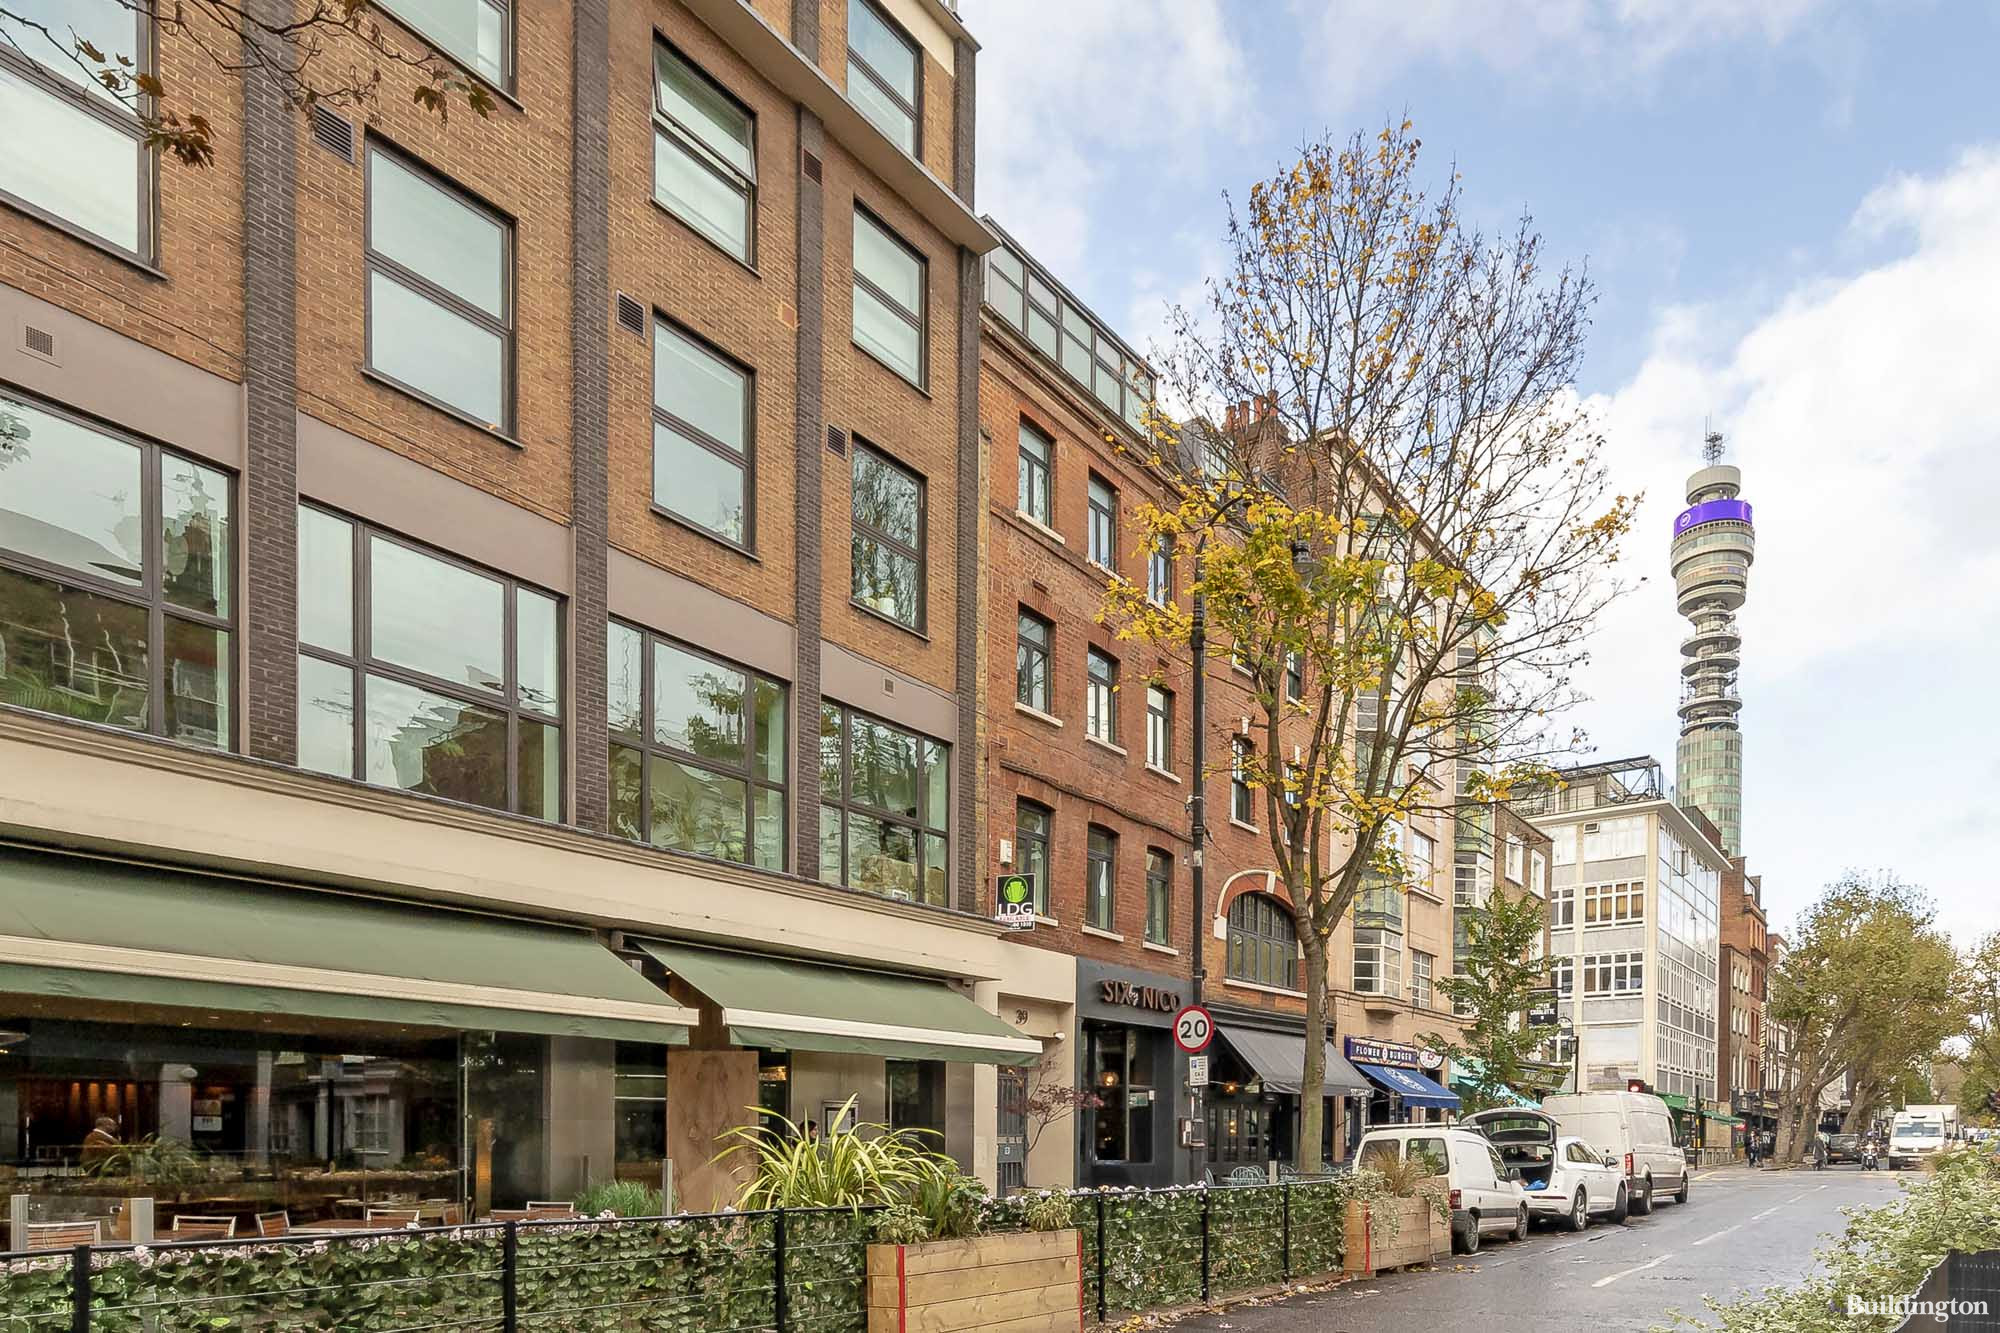 41 Charlotte Street building comprises apartments above Six by Nico - the uber-trendy restaurant by Nico Simone. 